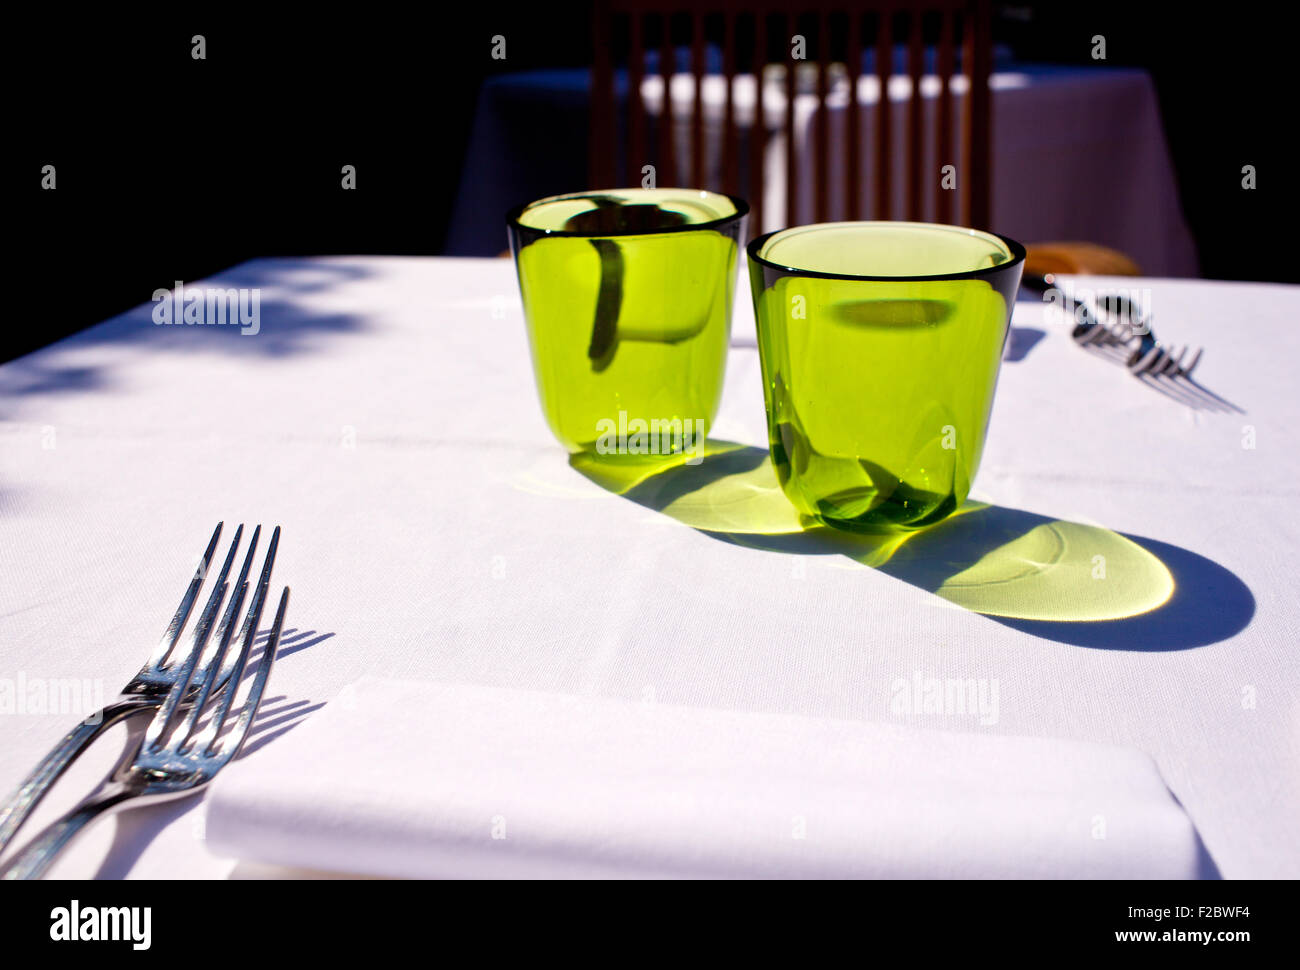 Green glasses on set table Stock Photo